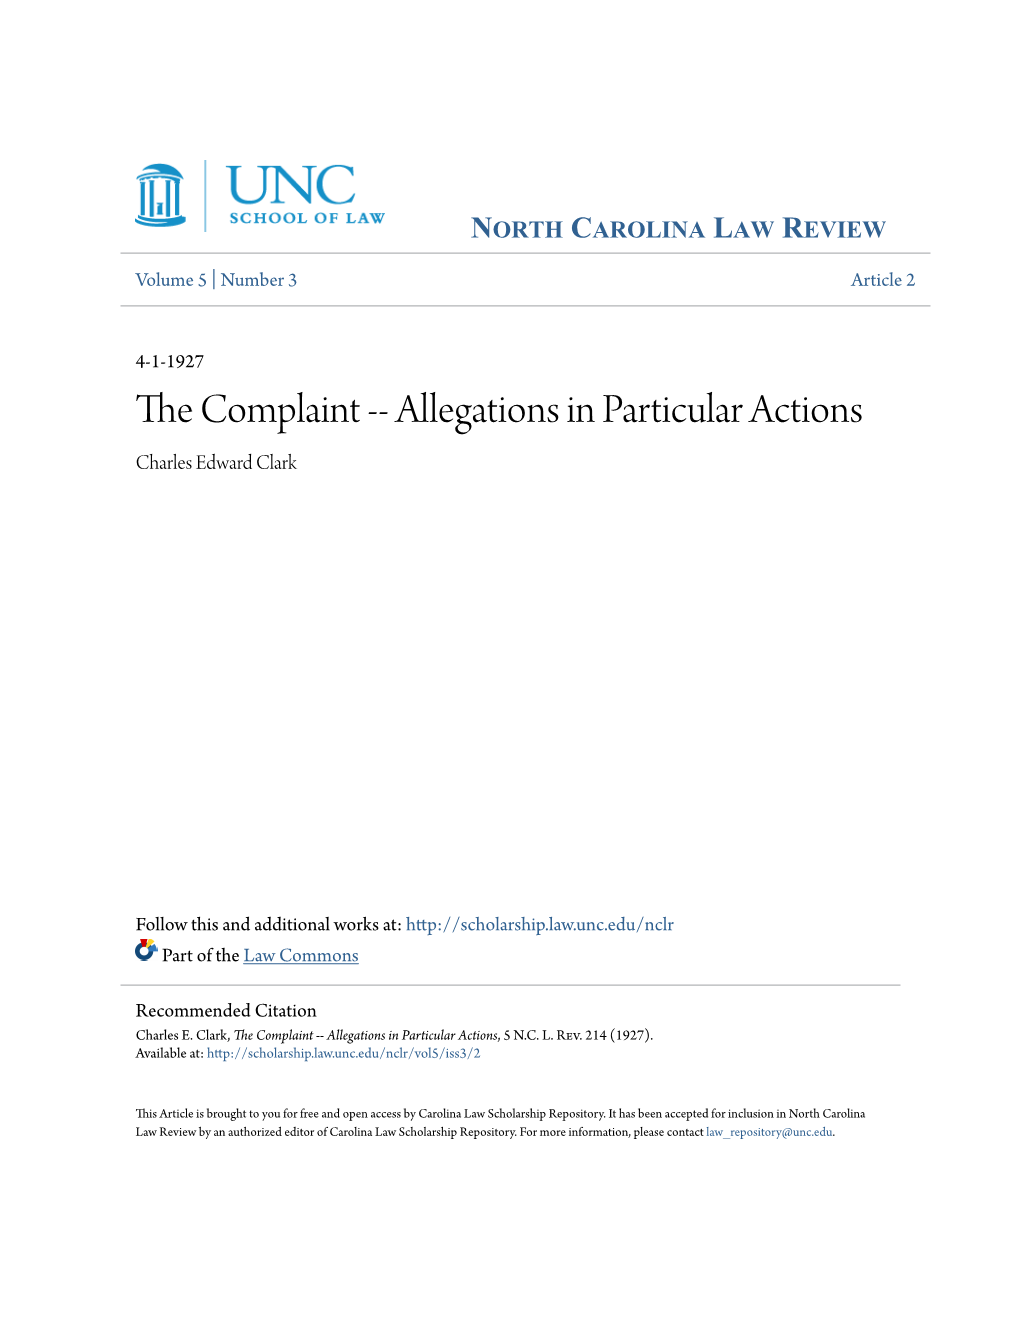 The Complaint -- Allegations in Particular Actions, 5 N.C